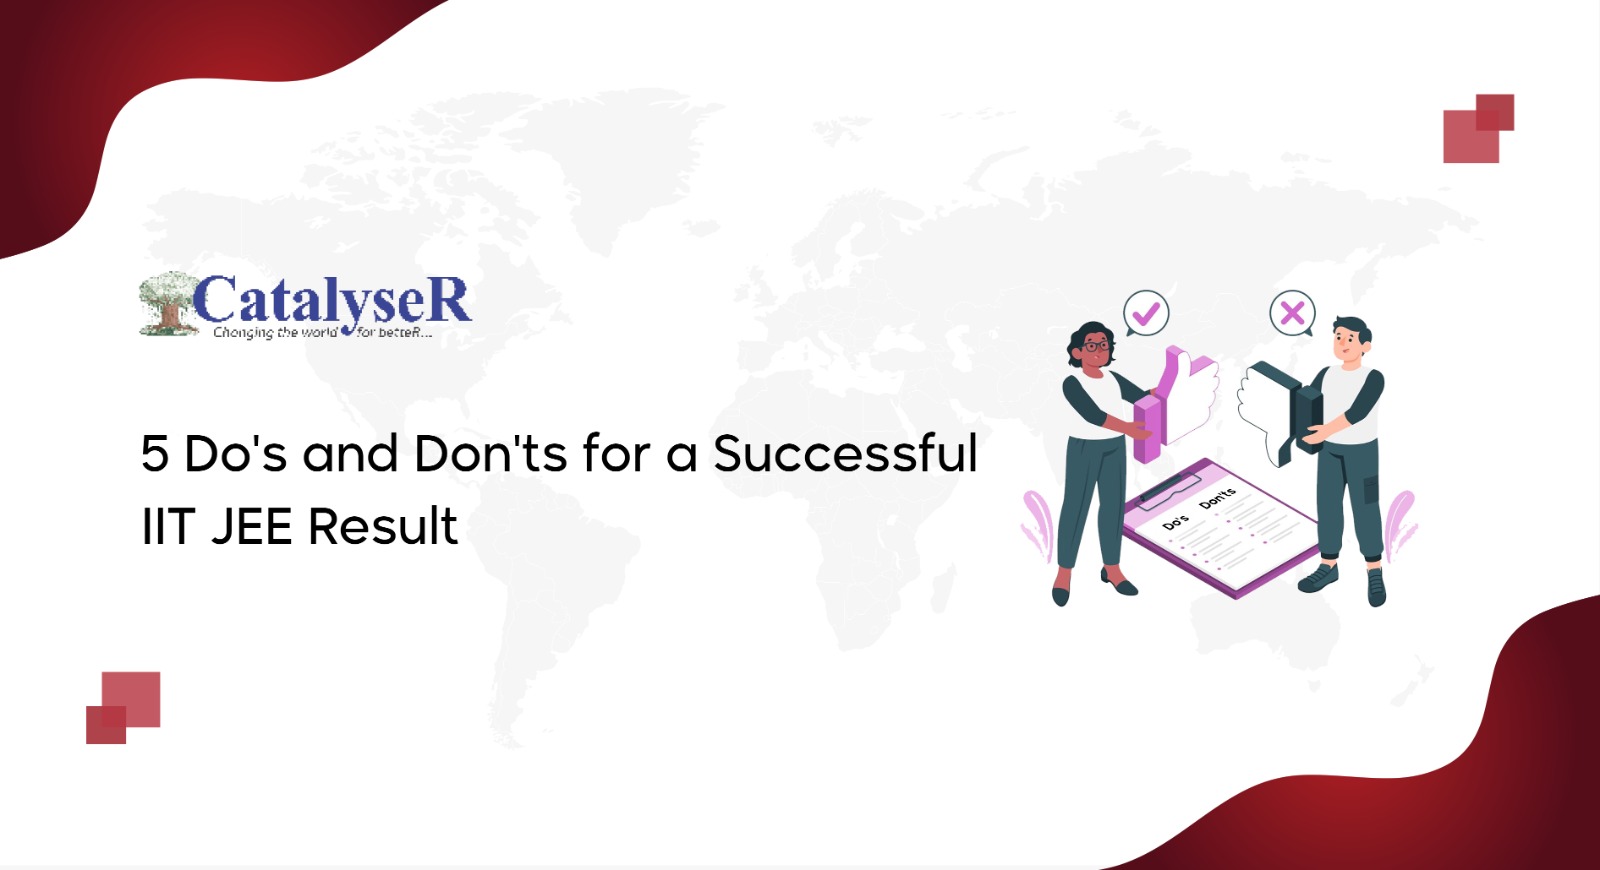 5 Do's and Don'ts for a Successful IIT JEE Result